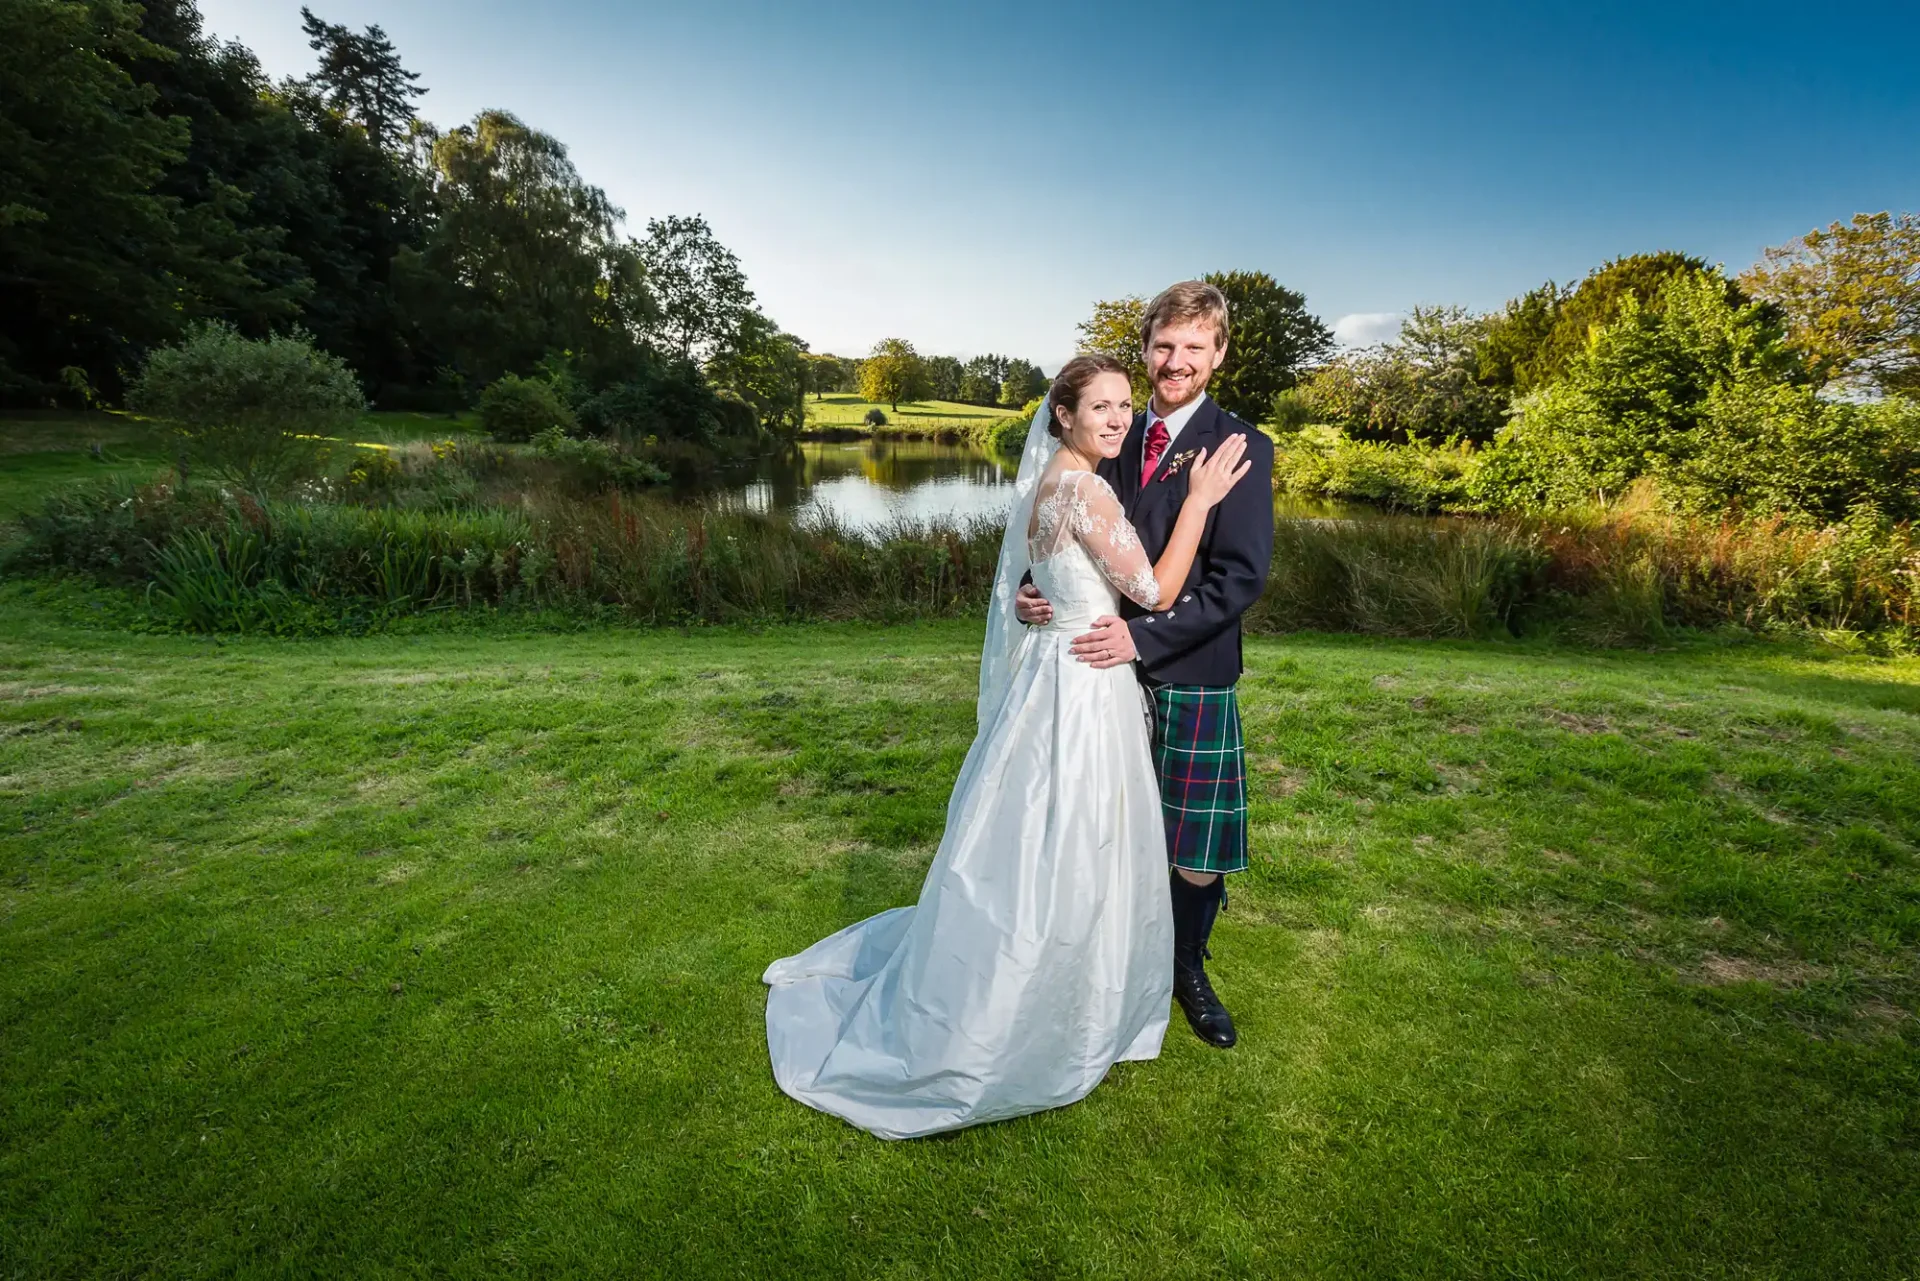 A bride in a white gown and a groom in a kilt embracing on a grassy field with a pond and trees in the background.